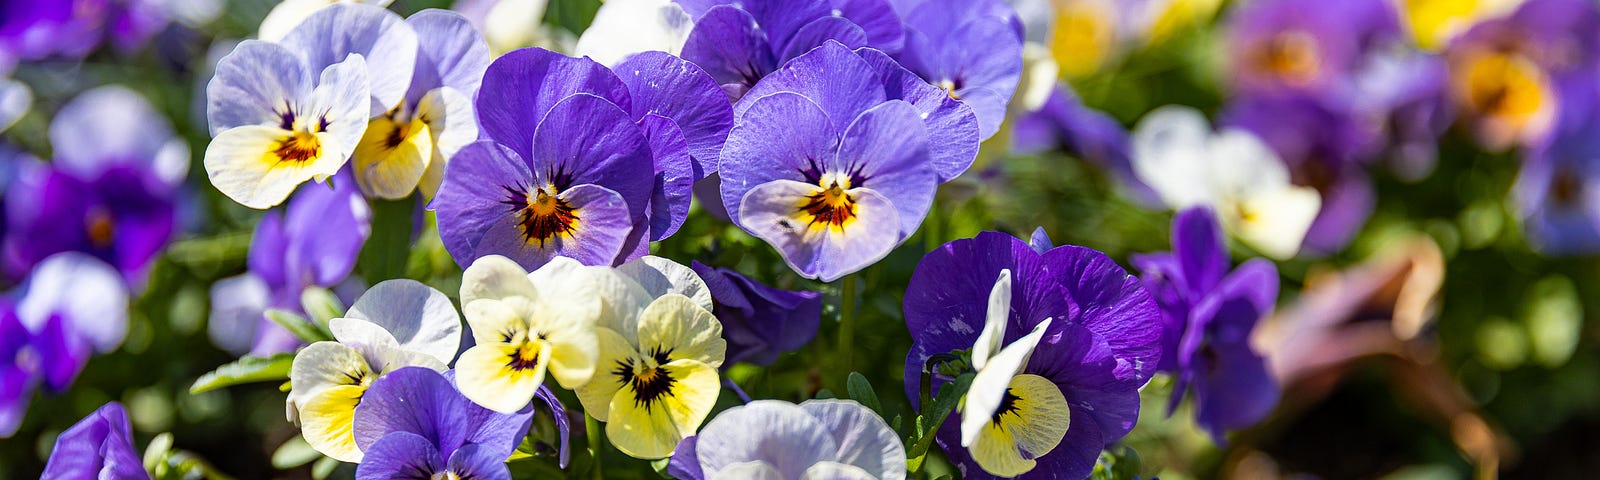 Cluster of violet, white and yellow pansies